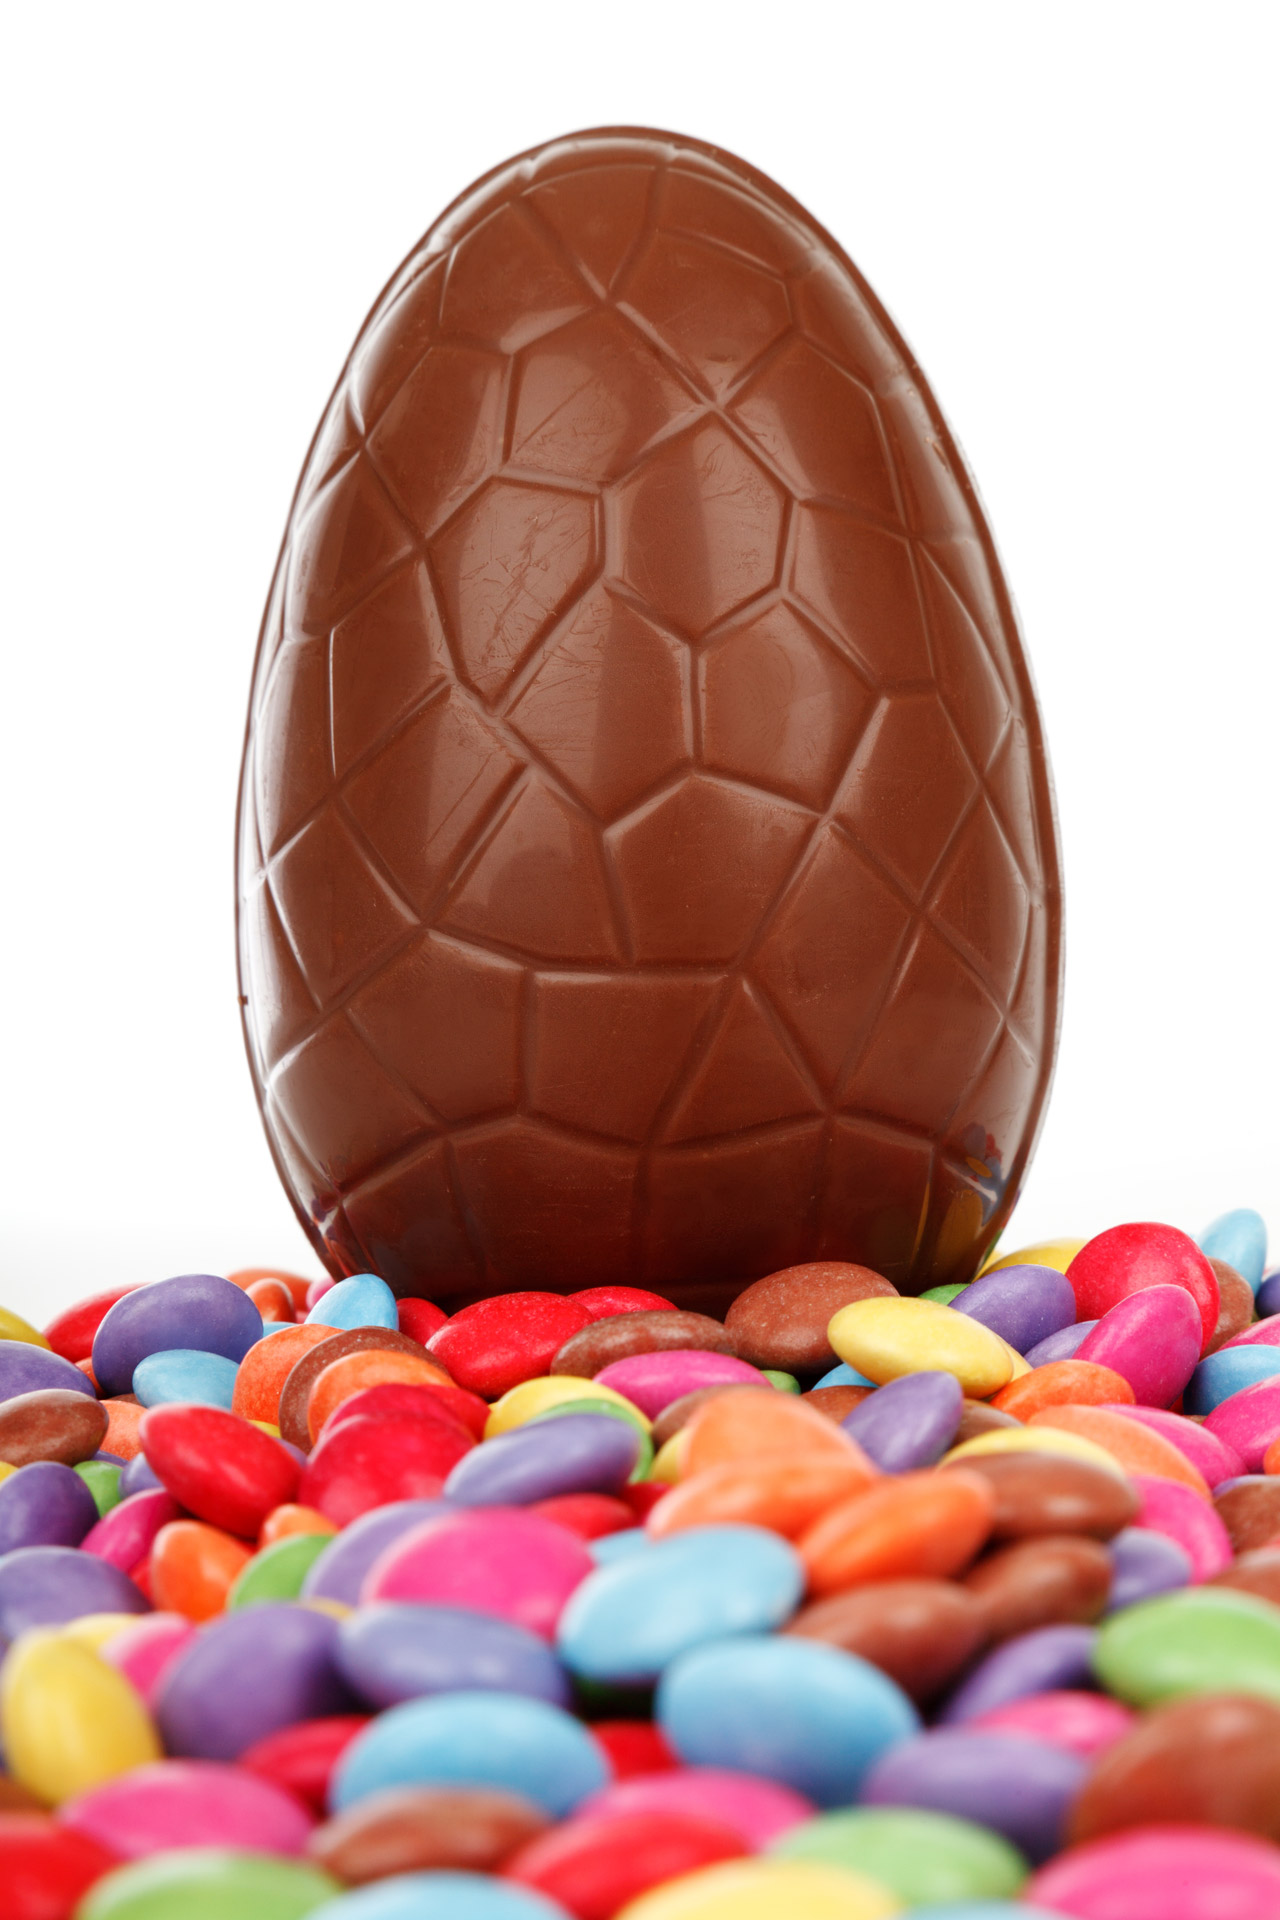 Chocolate Easter Egg And Candy Free Stock Photo - Public Domain Pictures